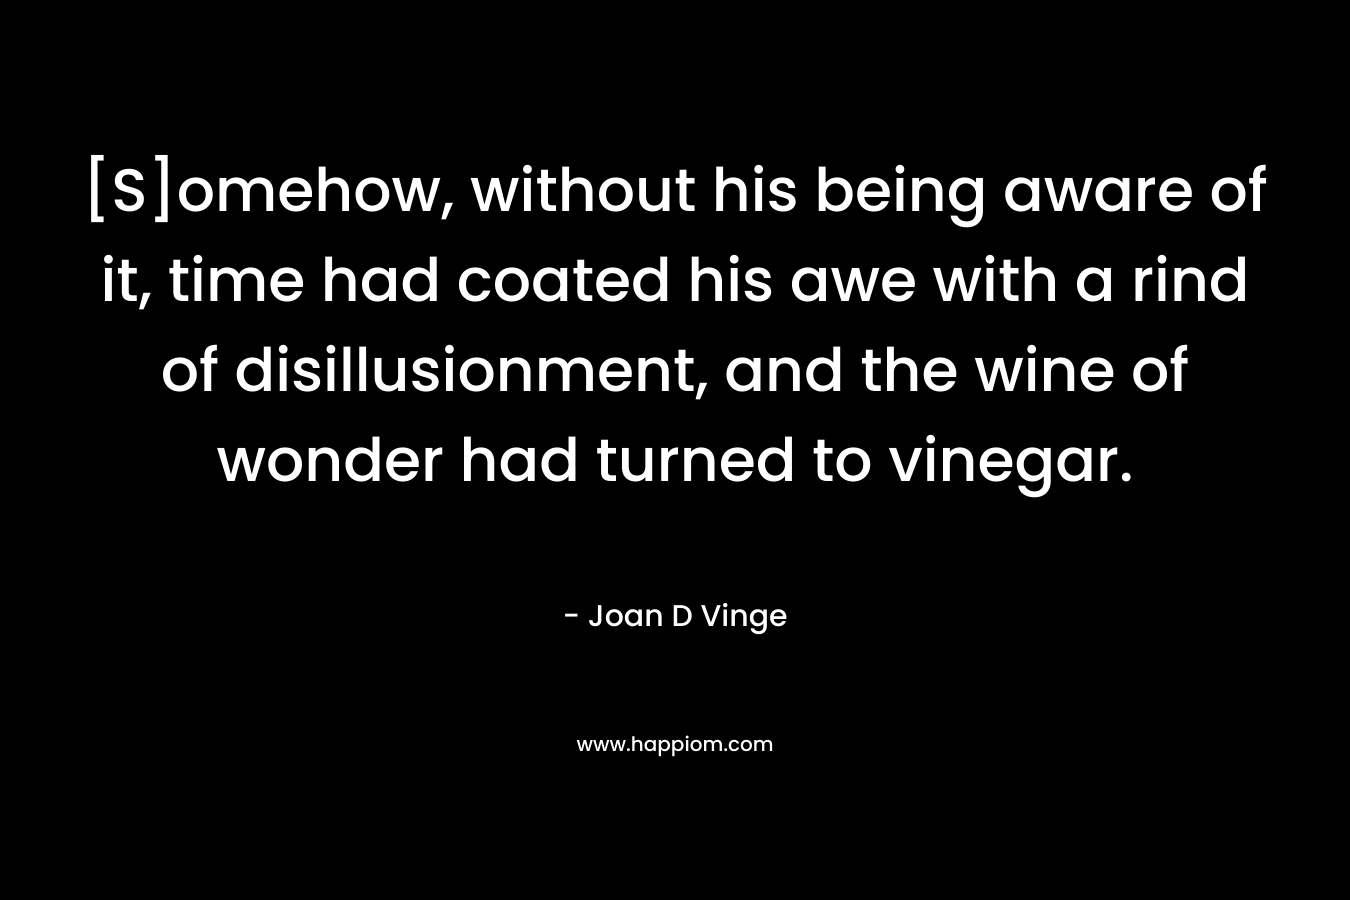 [S]omehow, without his being aware of it, time had coated his awe with a rind of disillusionment, and the wine of wonder had turned to vinegar. – Joan D Vinge